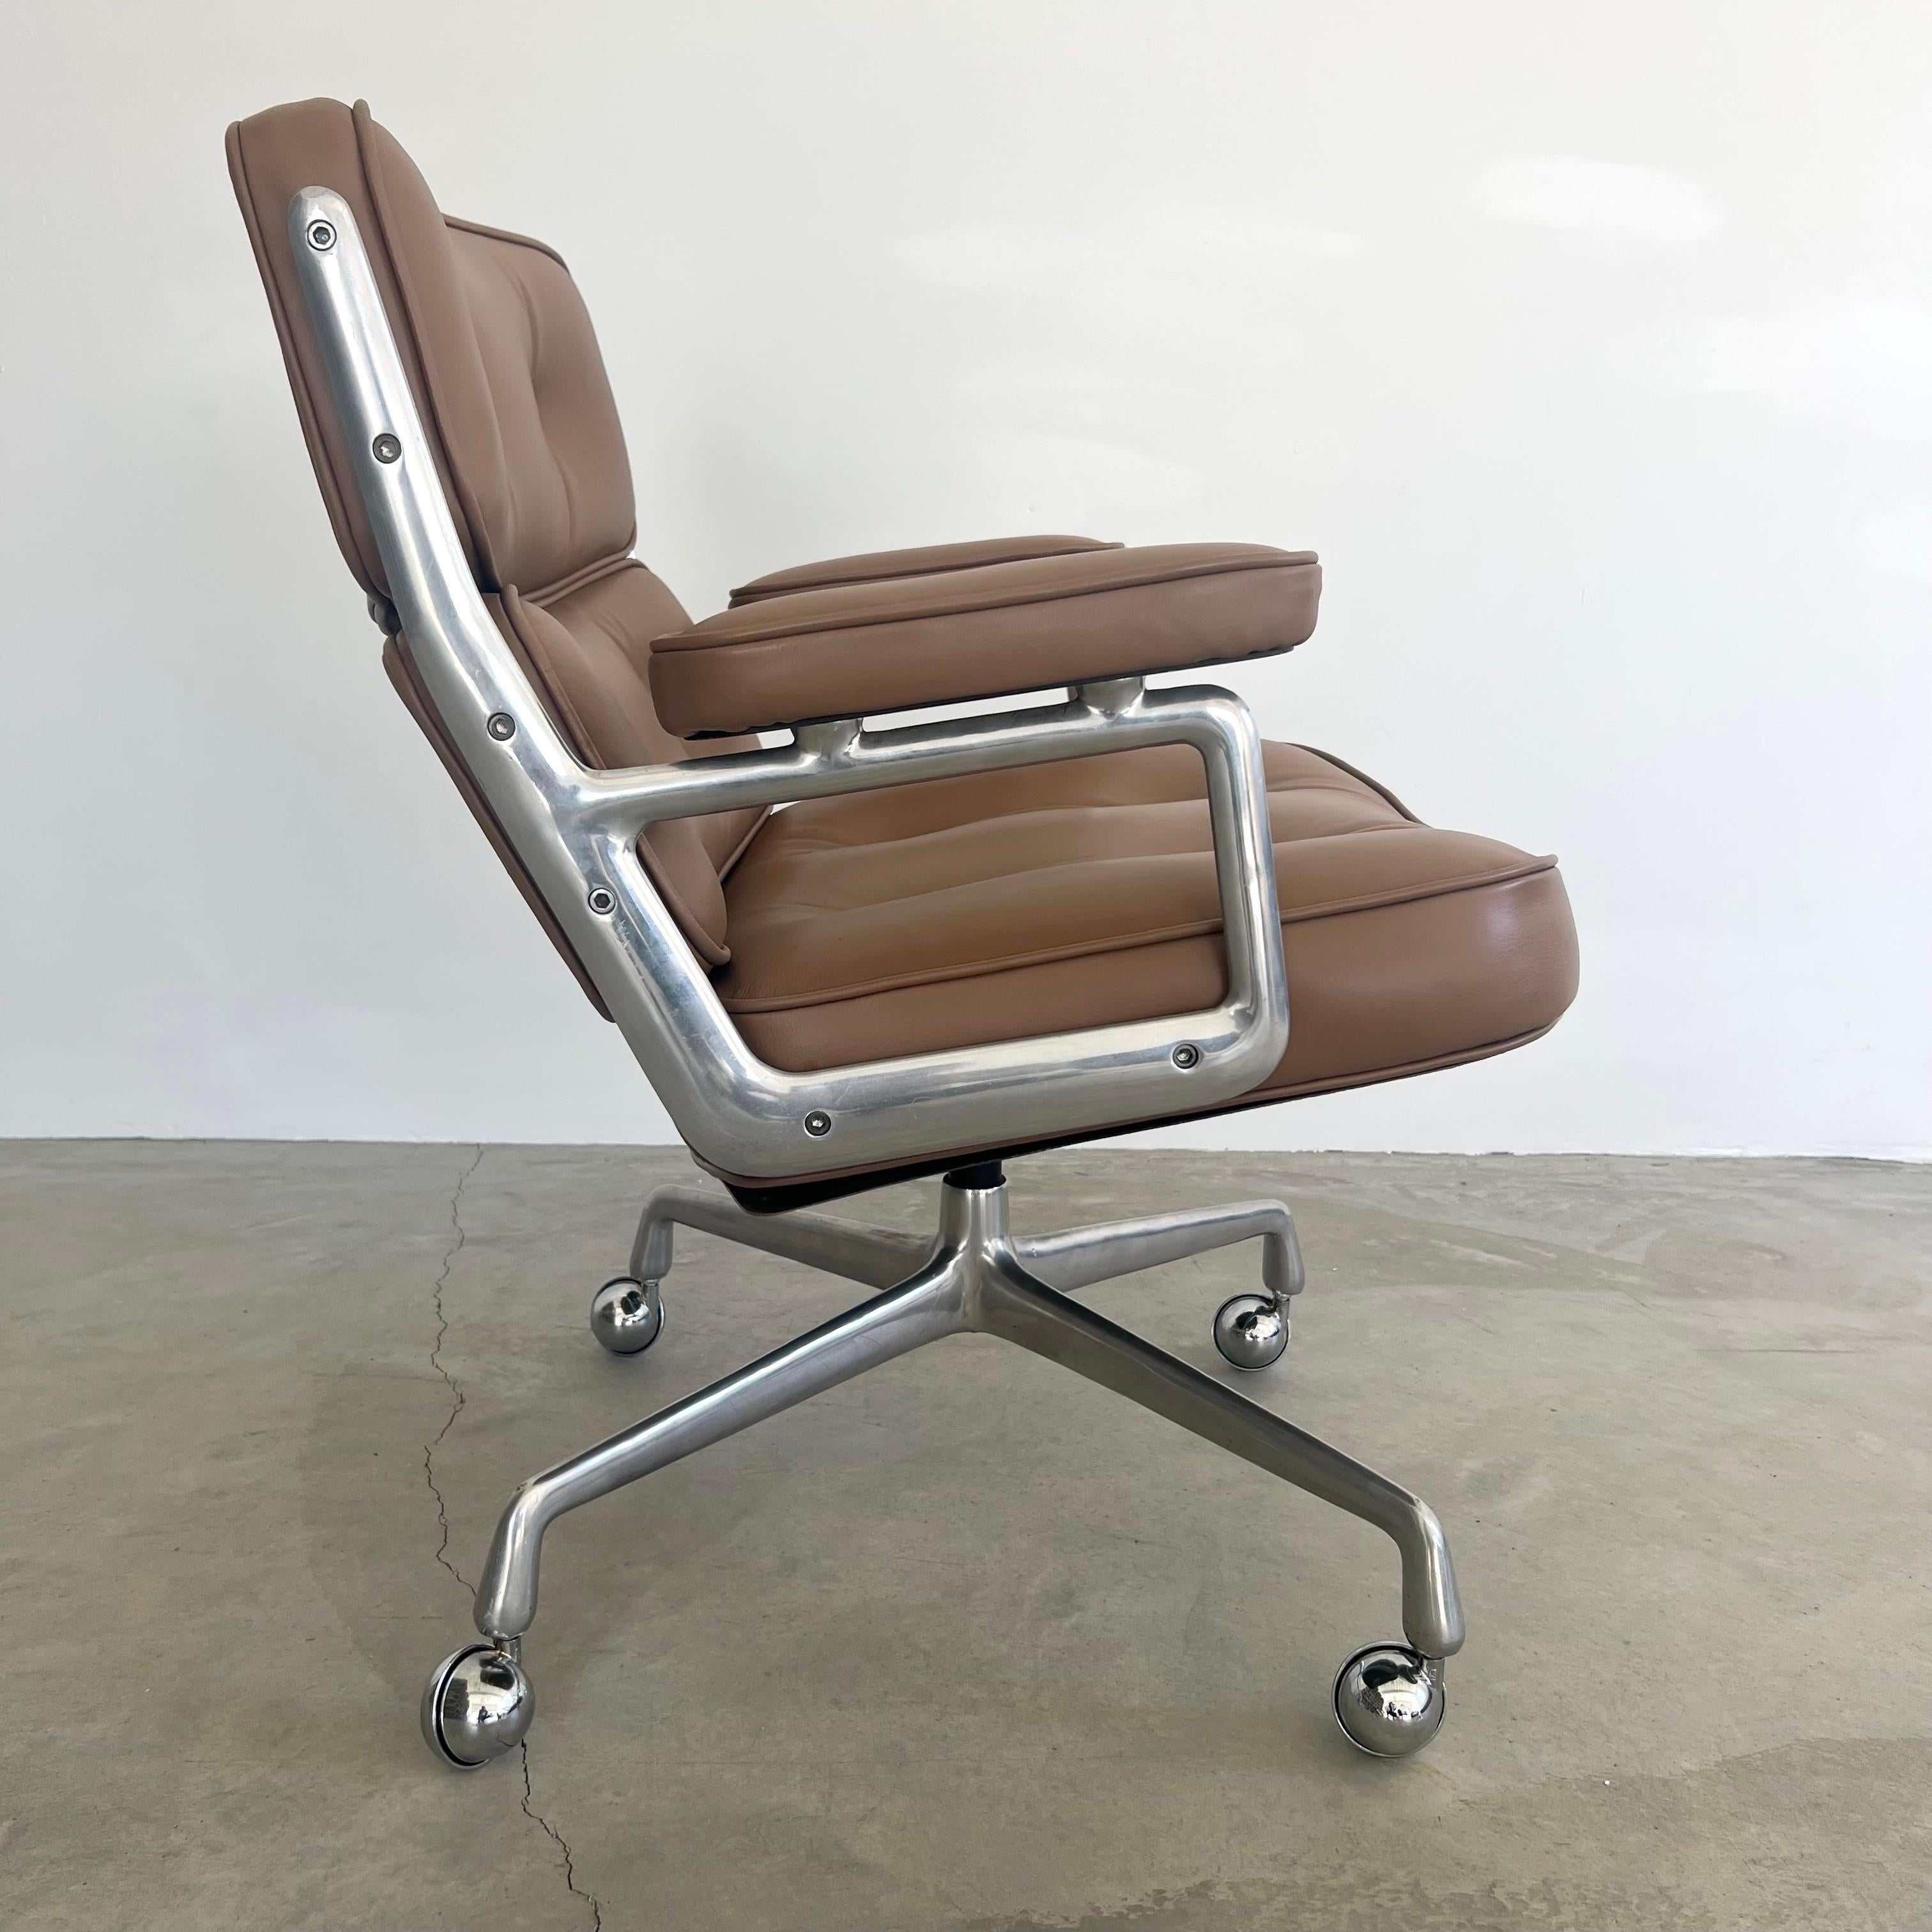 Mid-Century Modern Eames Time Life Lobby Lounge Chair in Tan Leather for Herman Miller, 1980s USA